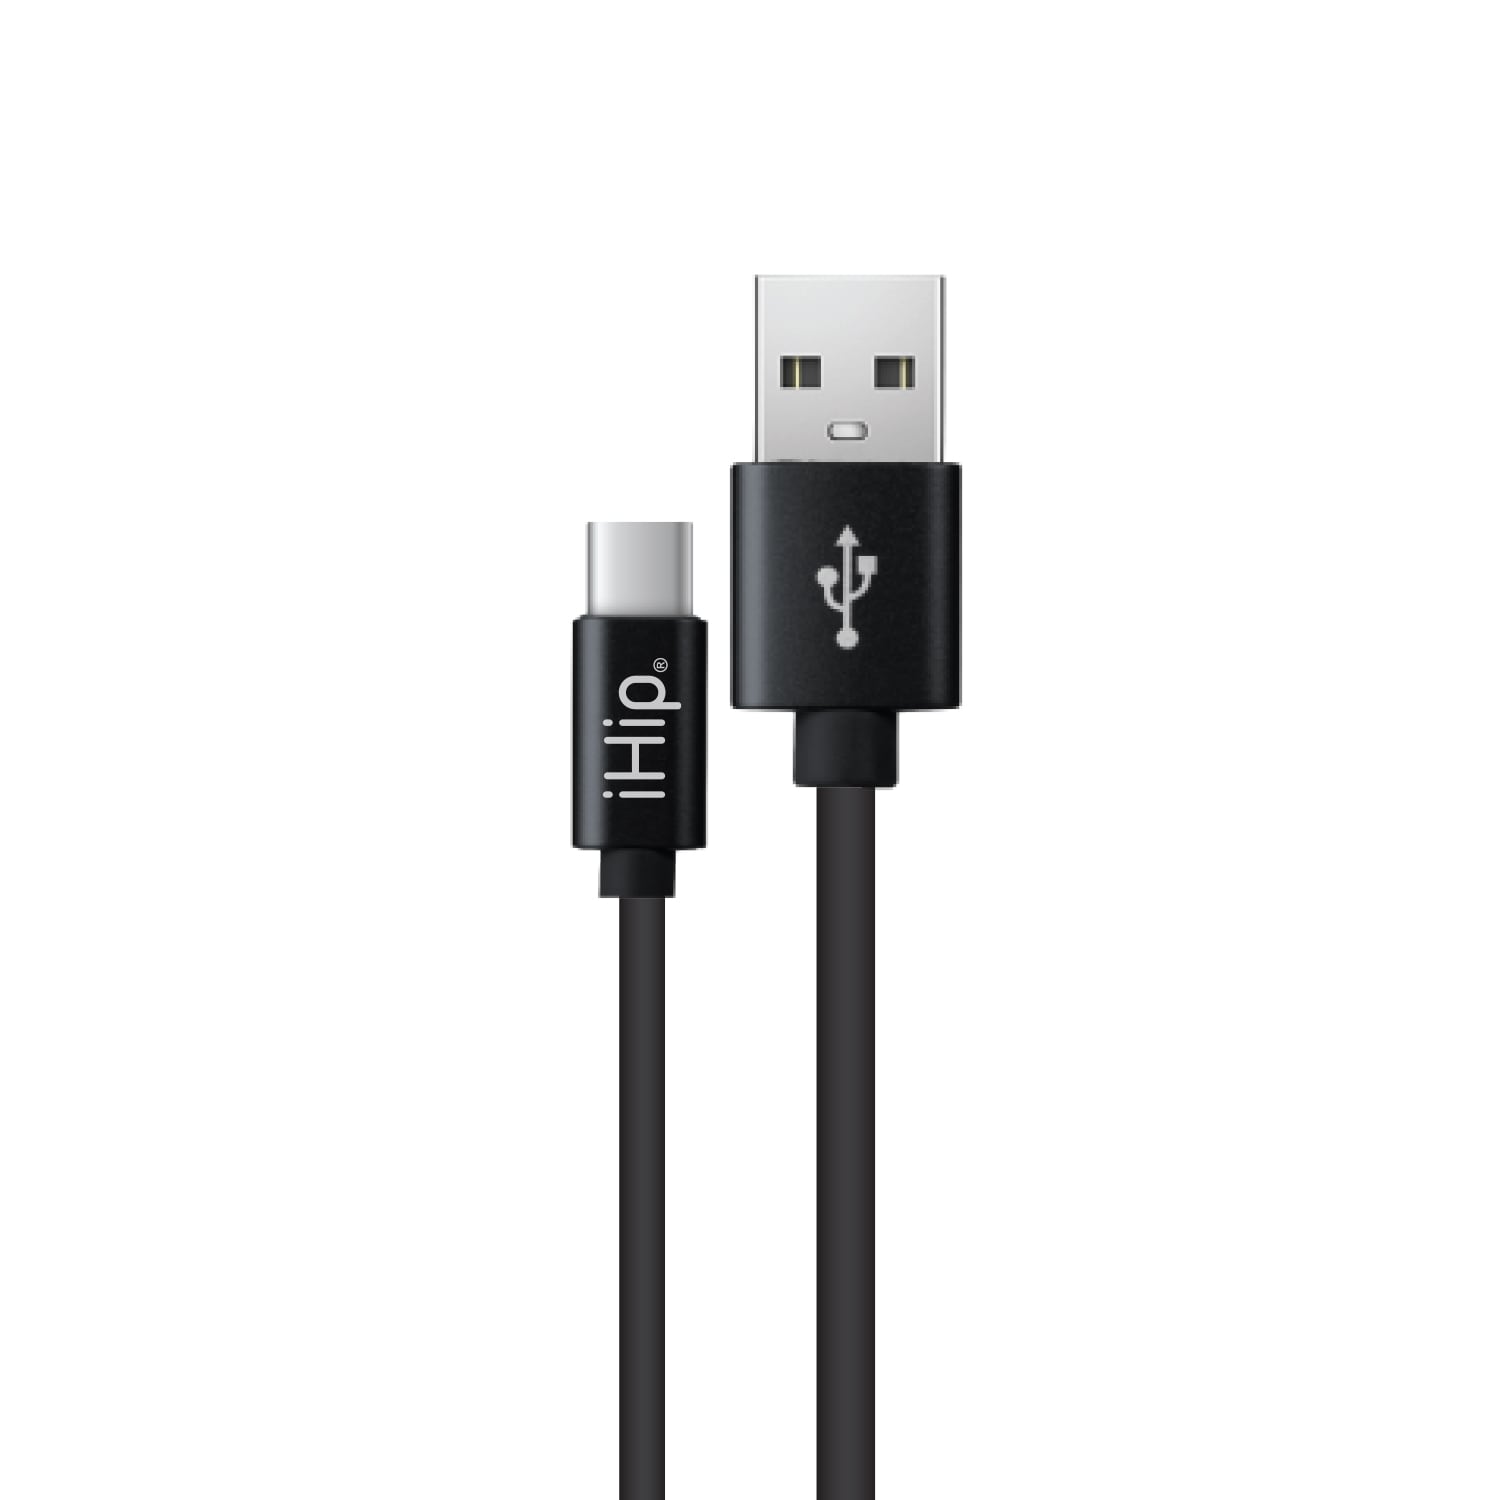 Purple XL and More 1ft,3ft,6ft,10ft 4-Pcs Switch Pixel USB Type C Cable LG V30/V20 G6 G5,Google Fasgear Braided Fast Charging Type-C 2.0 Cable Compatible with Note 9/S9/S10 